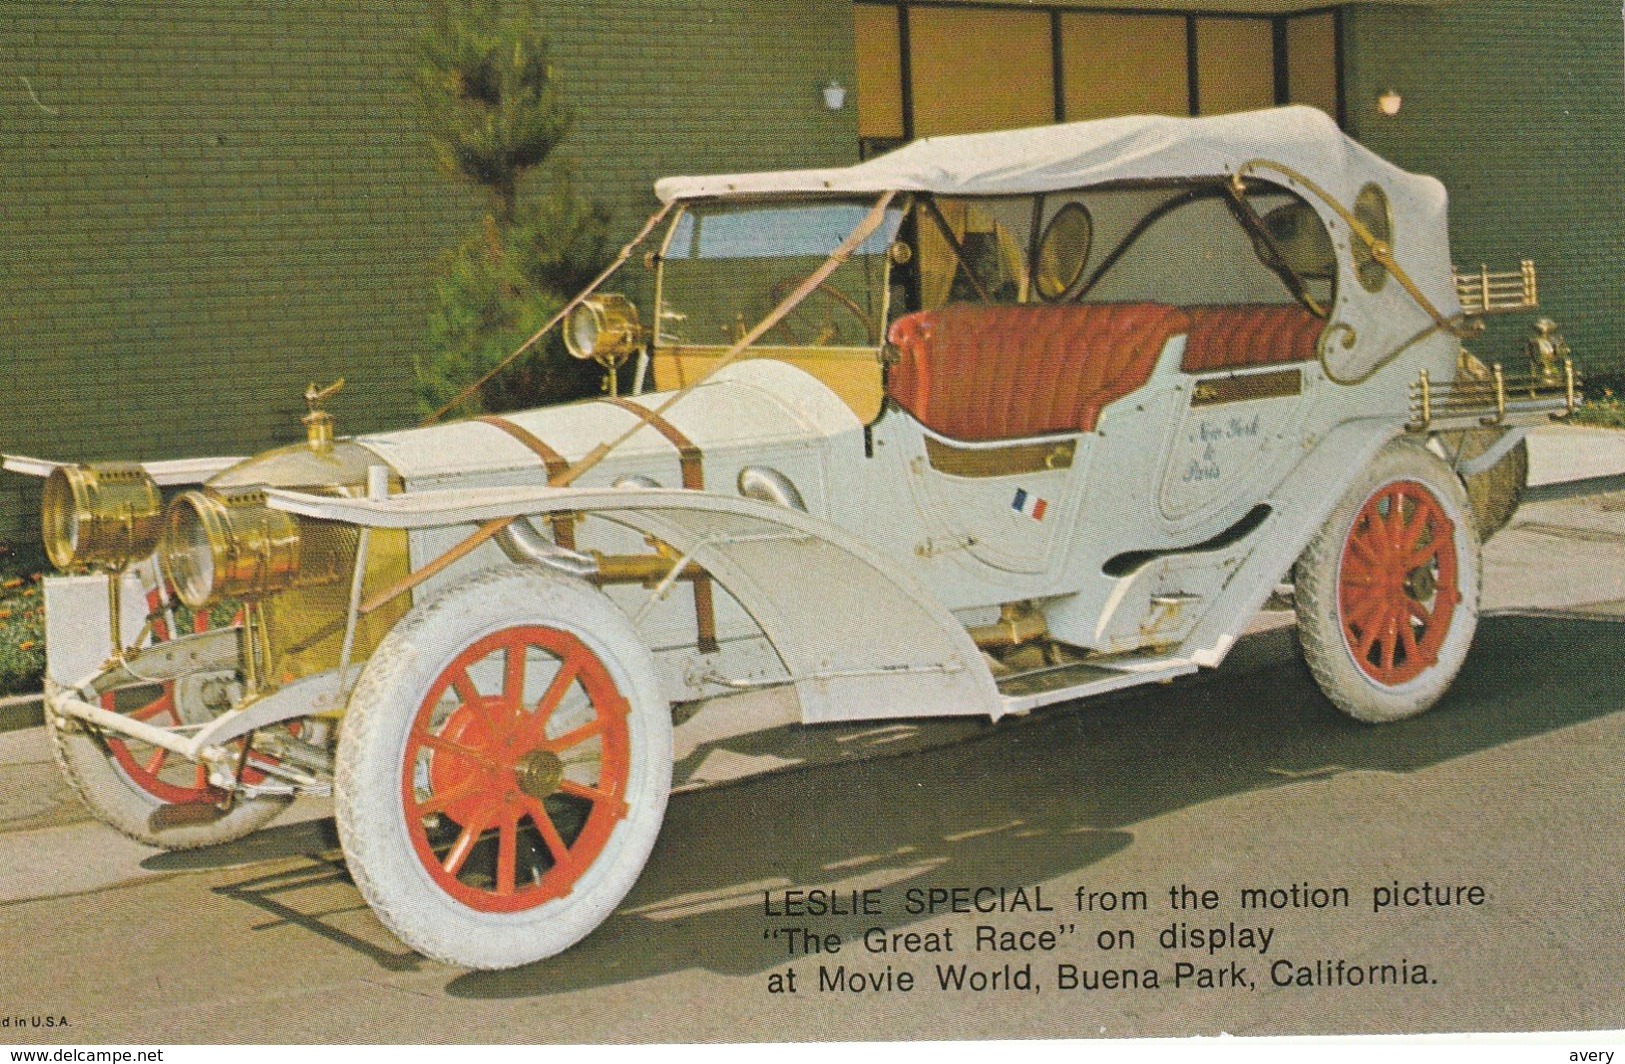 Leslie Special From The Motion Picture "The Great Race"  Movie World, Buena Park, California Valvoline Oil Company - Advertising